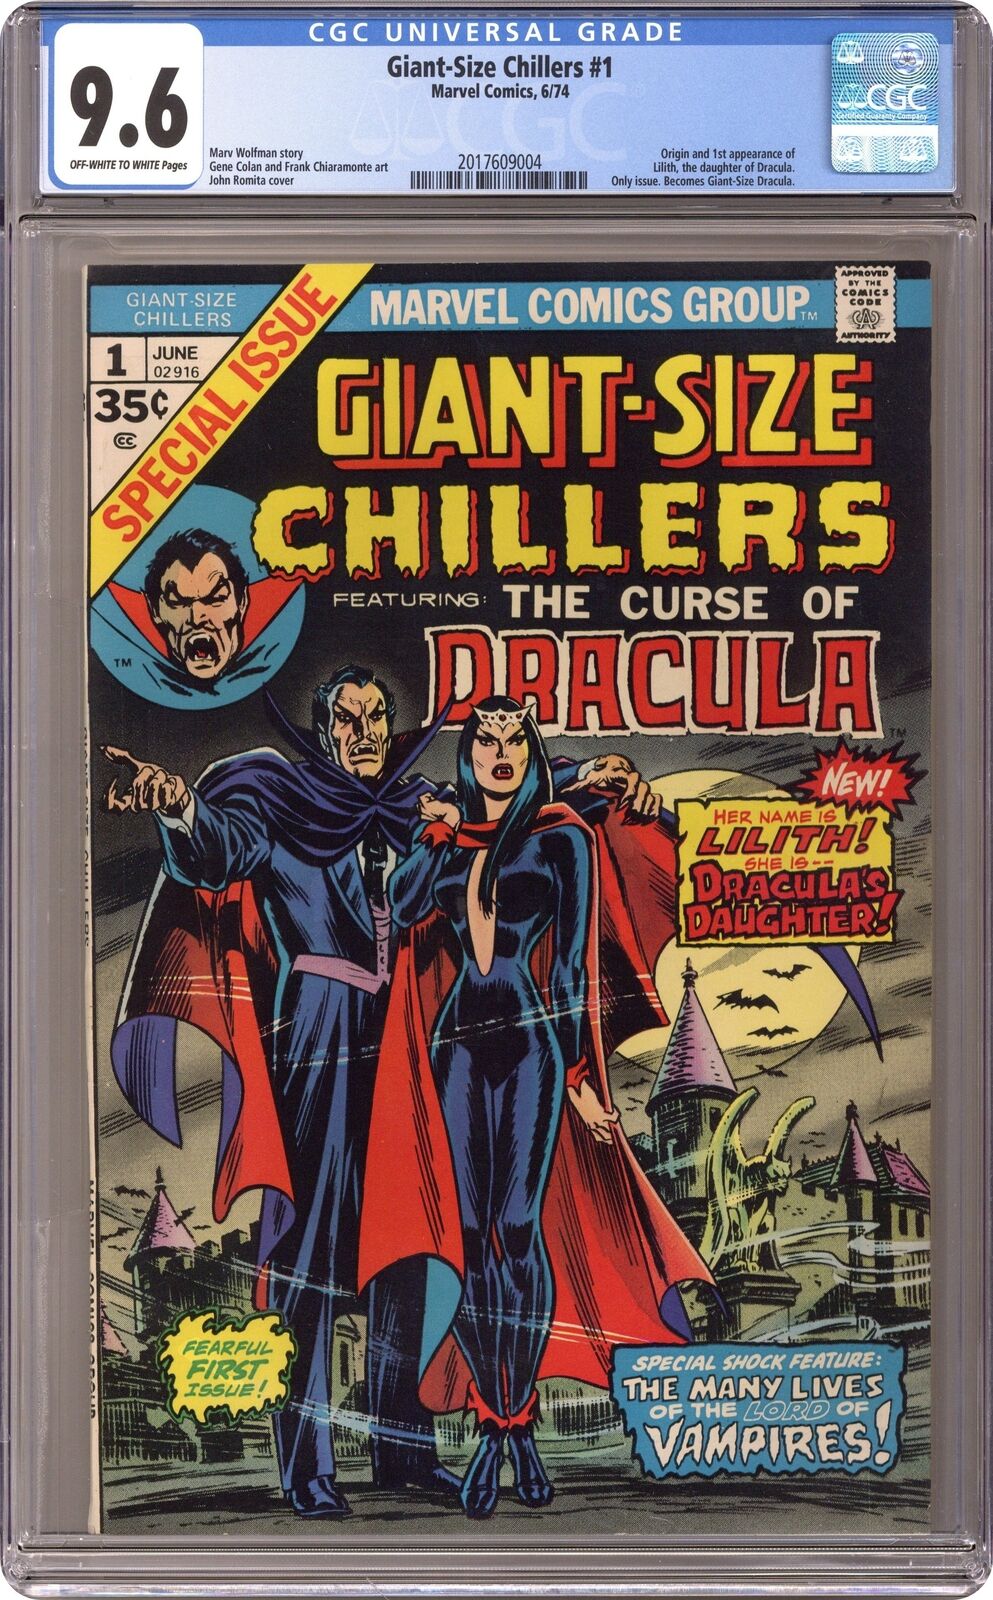 Giant Size Chillers Featuring Dracula #1 CGC 9.6 1974 2017609004